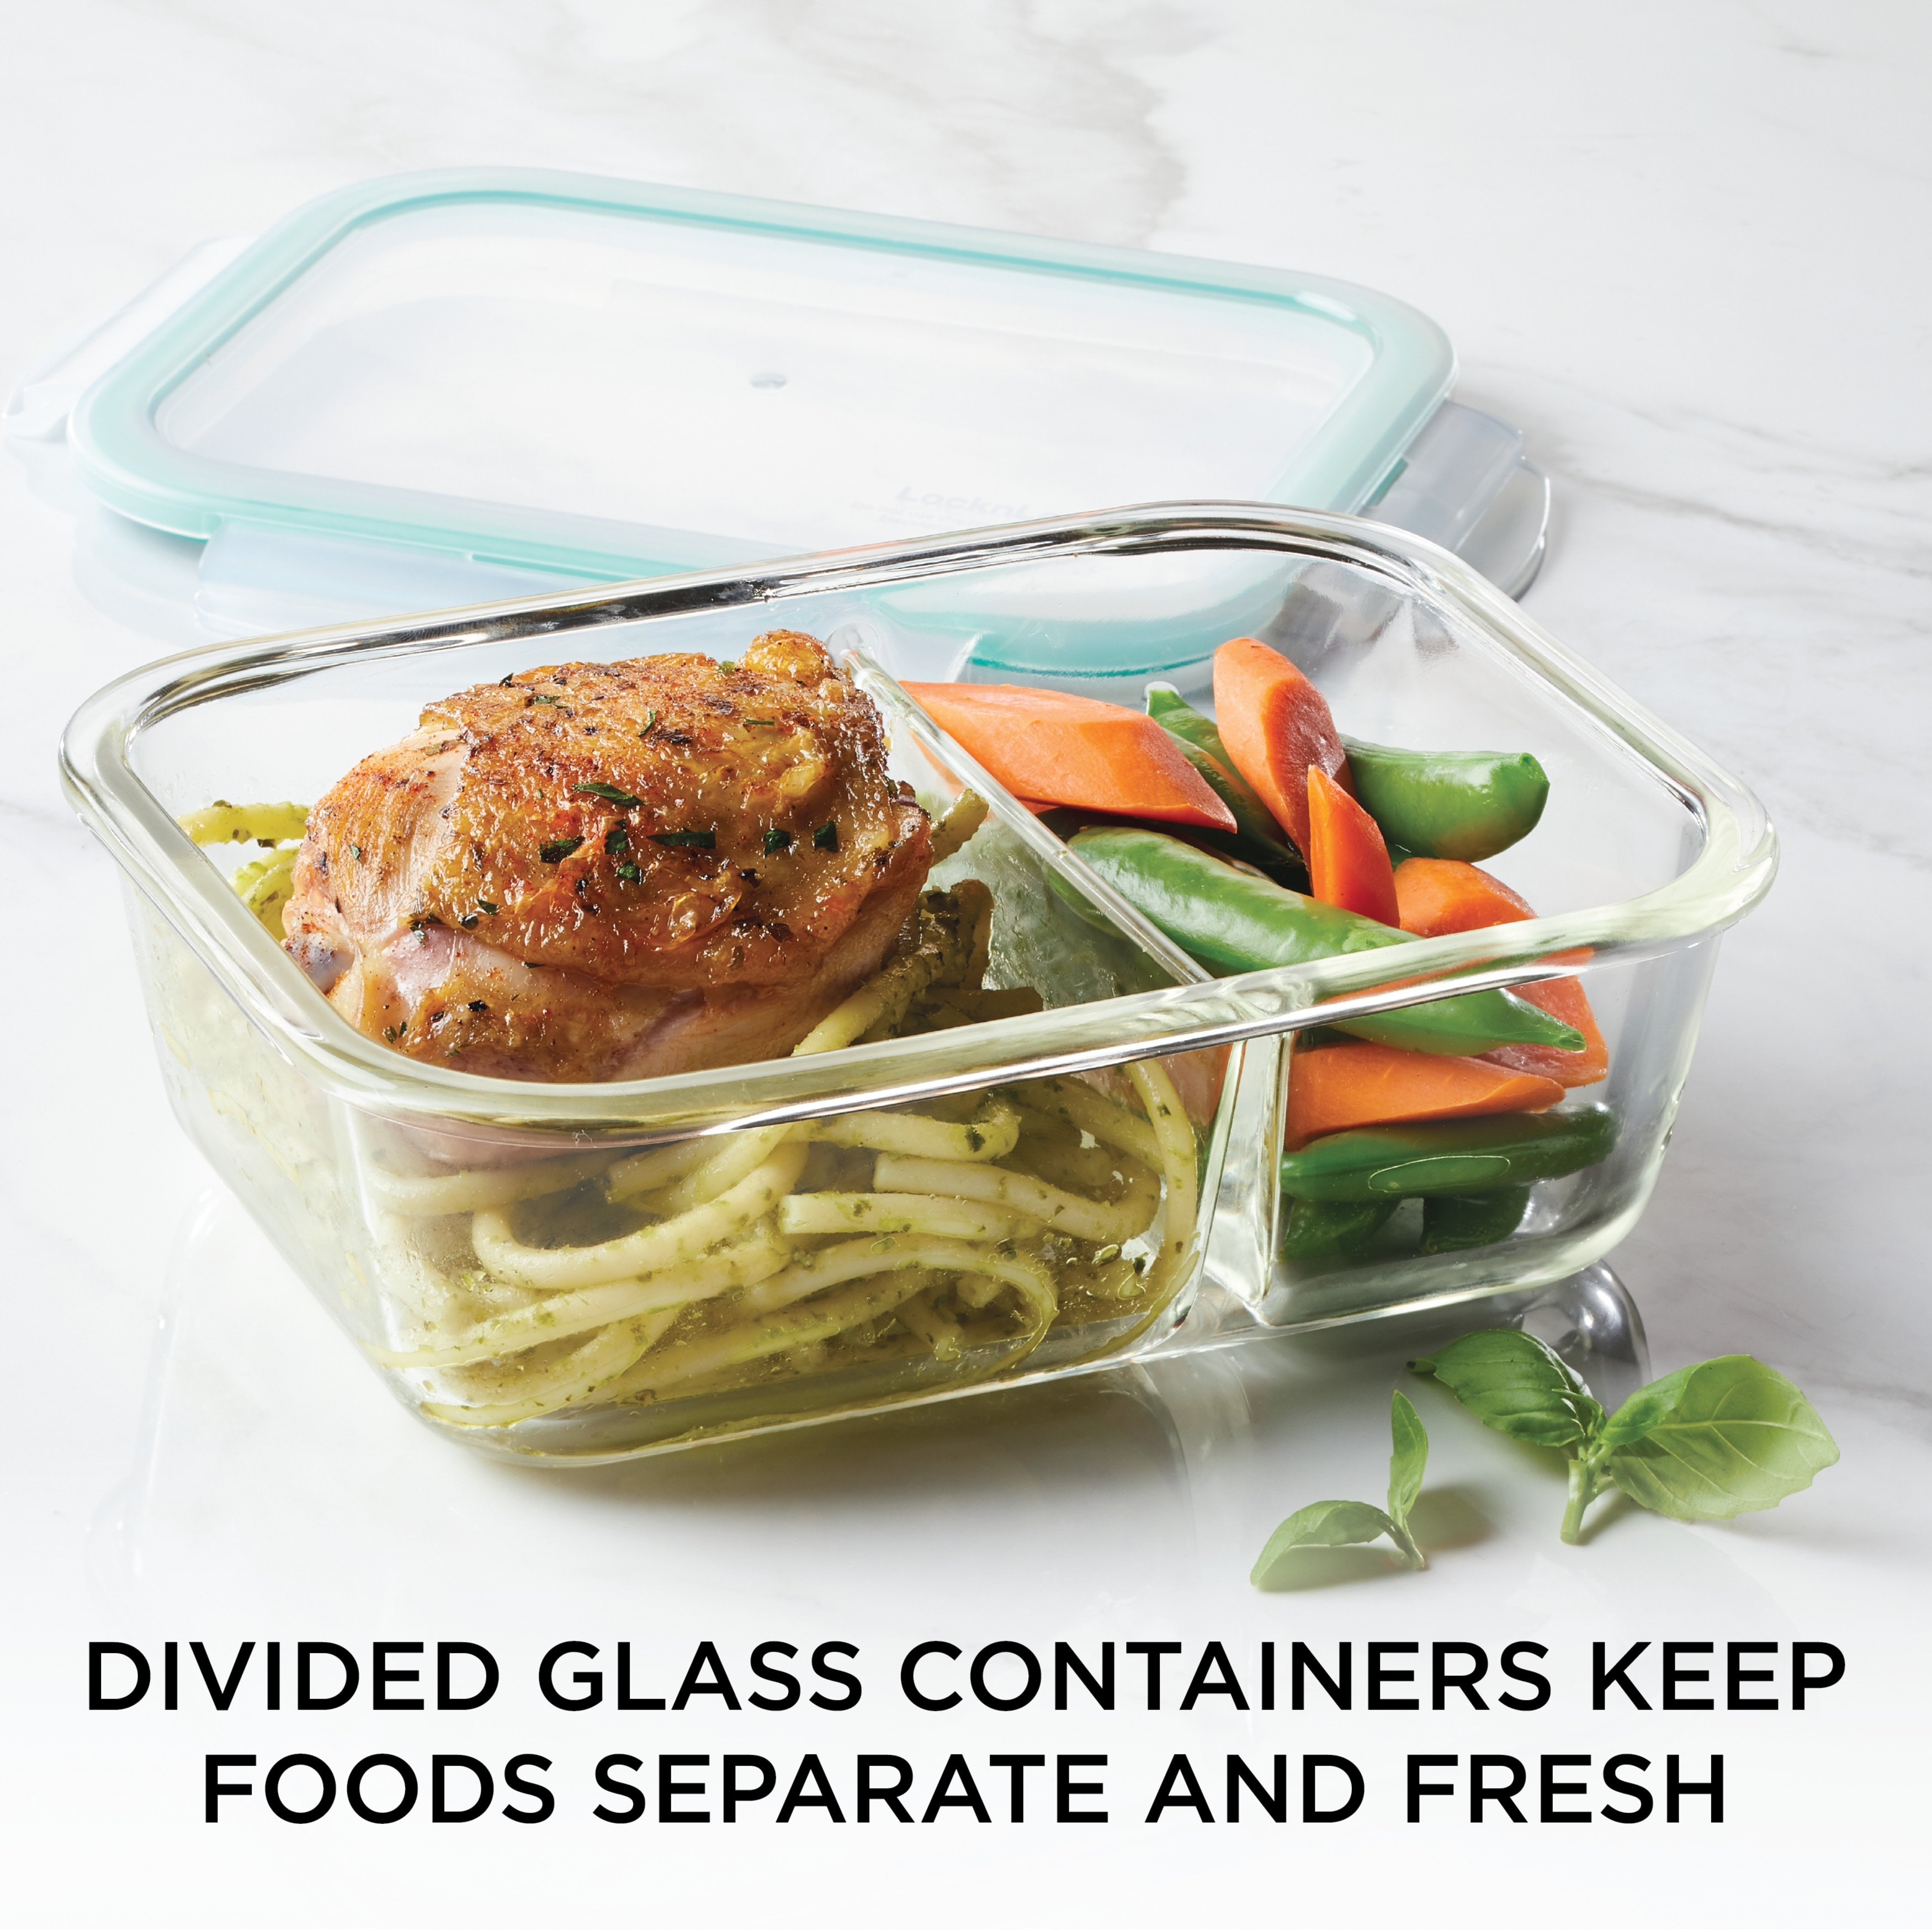 https://ak1.ostkcdn.com/images/products/is/images/direct/6e23c0b2aca3dec2821e6c99551f9a8763a66152/LocknLock-Purely-Better-Glass-Divided-Rectangular-Food-Storage-Containers%2C-25-Ounce%2C-Set-of-Three.jpg